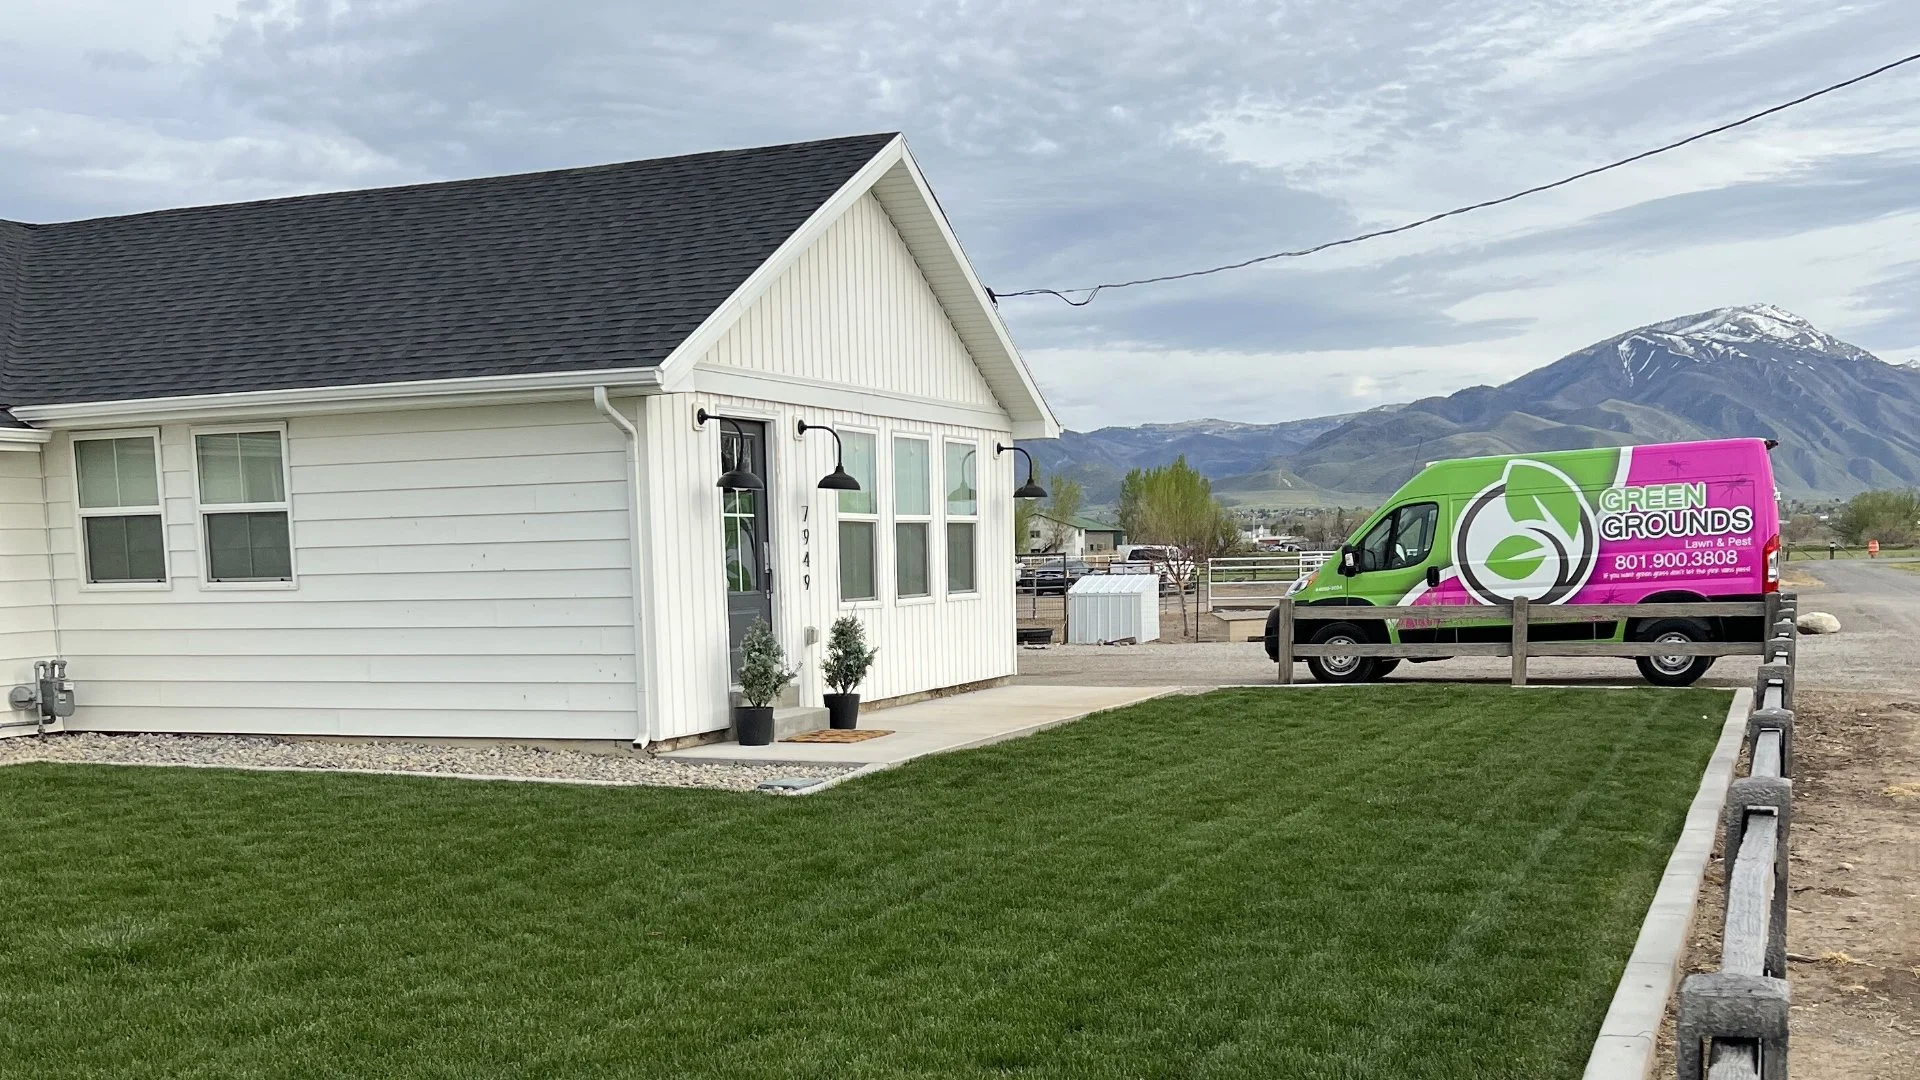 Home in American Fork, UT with nice grass showcasing our truck.